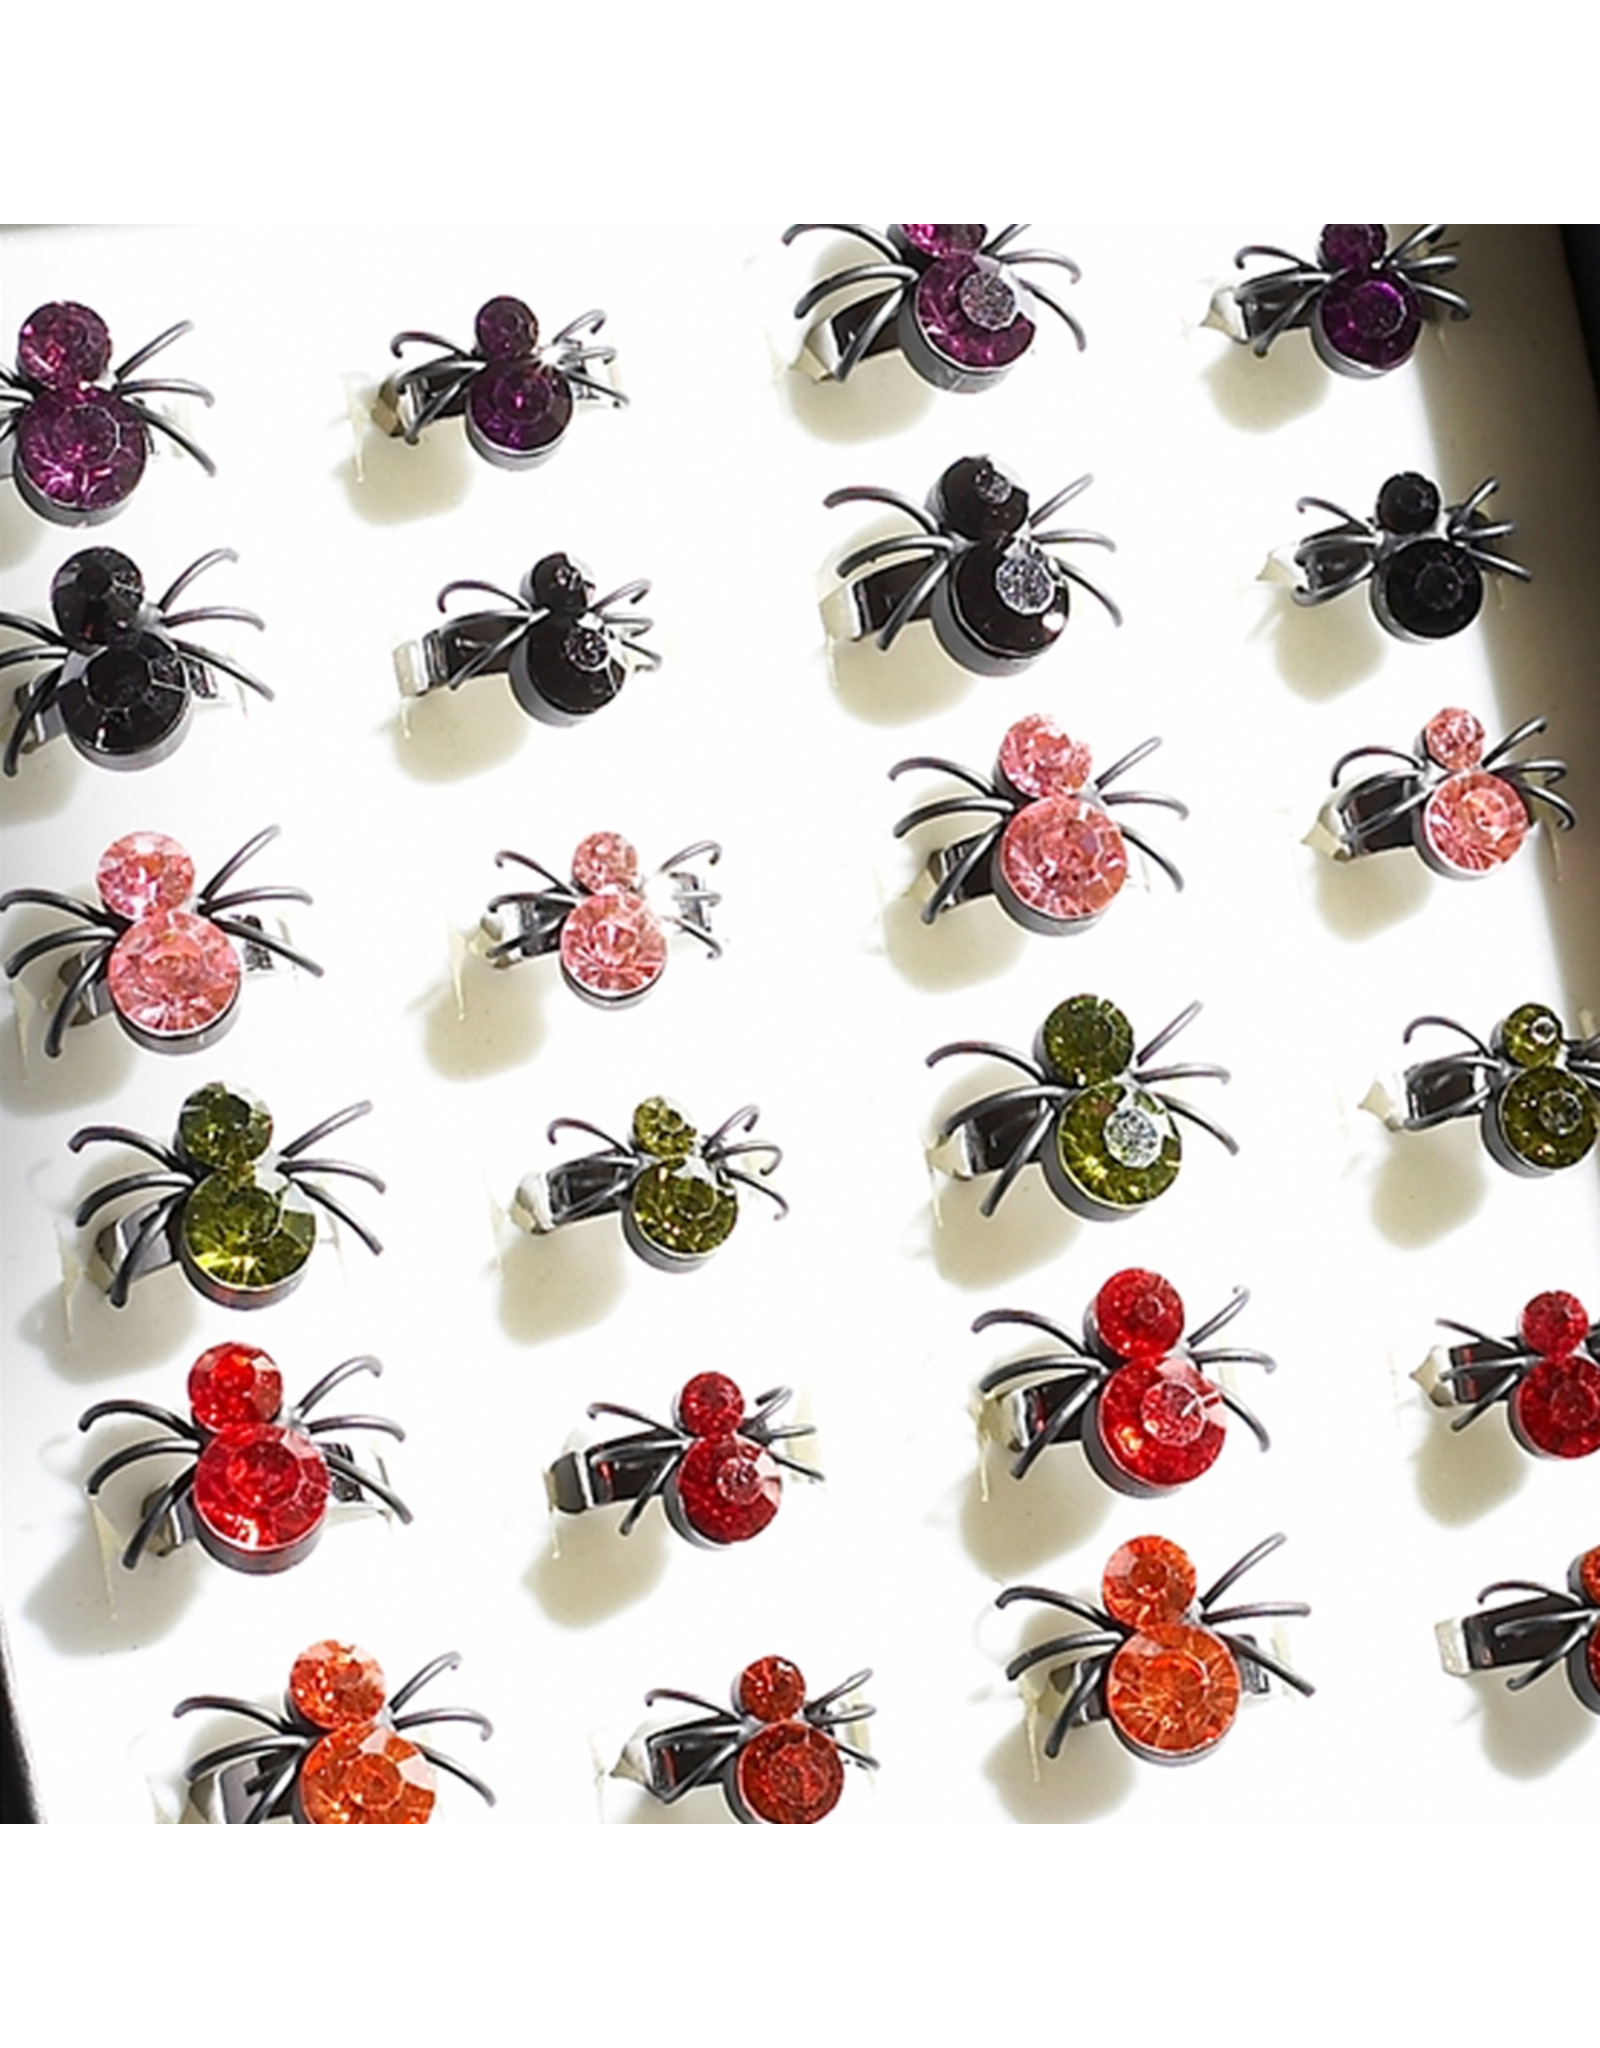 Twos Company Halloween Black Widow Bling Spider Ring .5 inch 0300-S-Pink